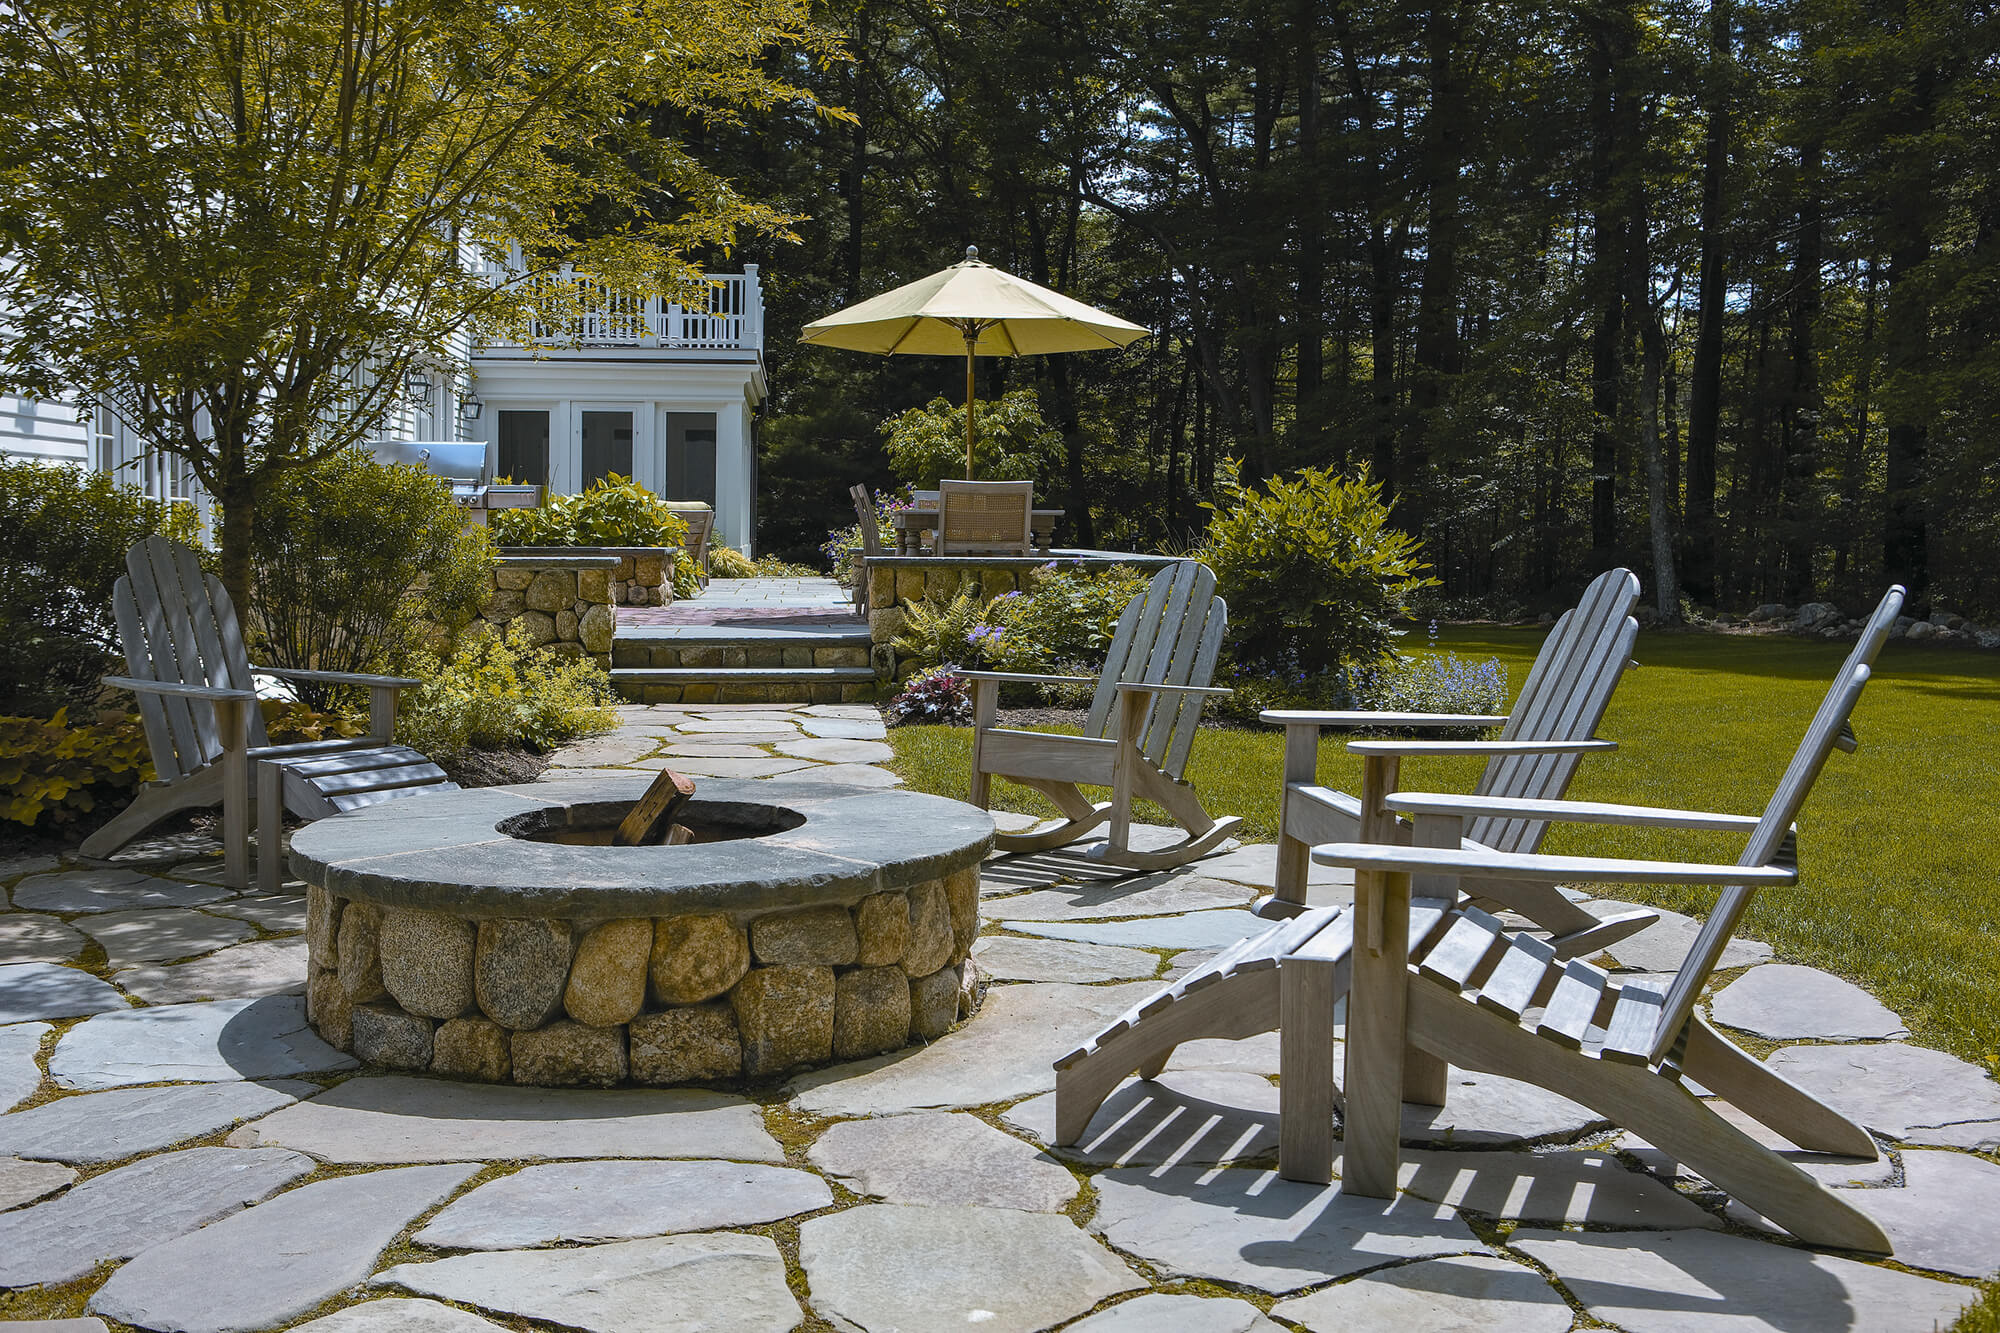 Fire Pit on Stone Patio with Seating